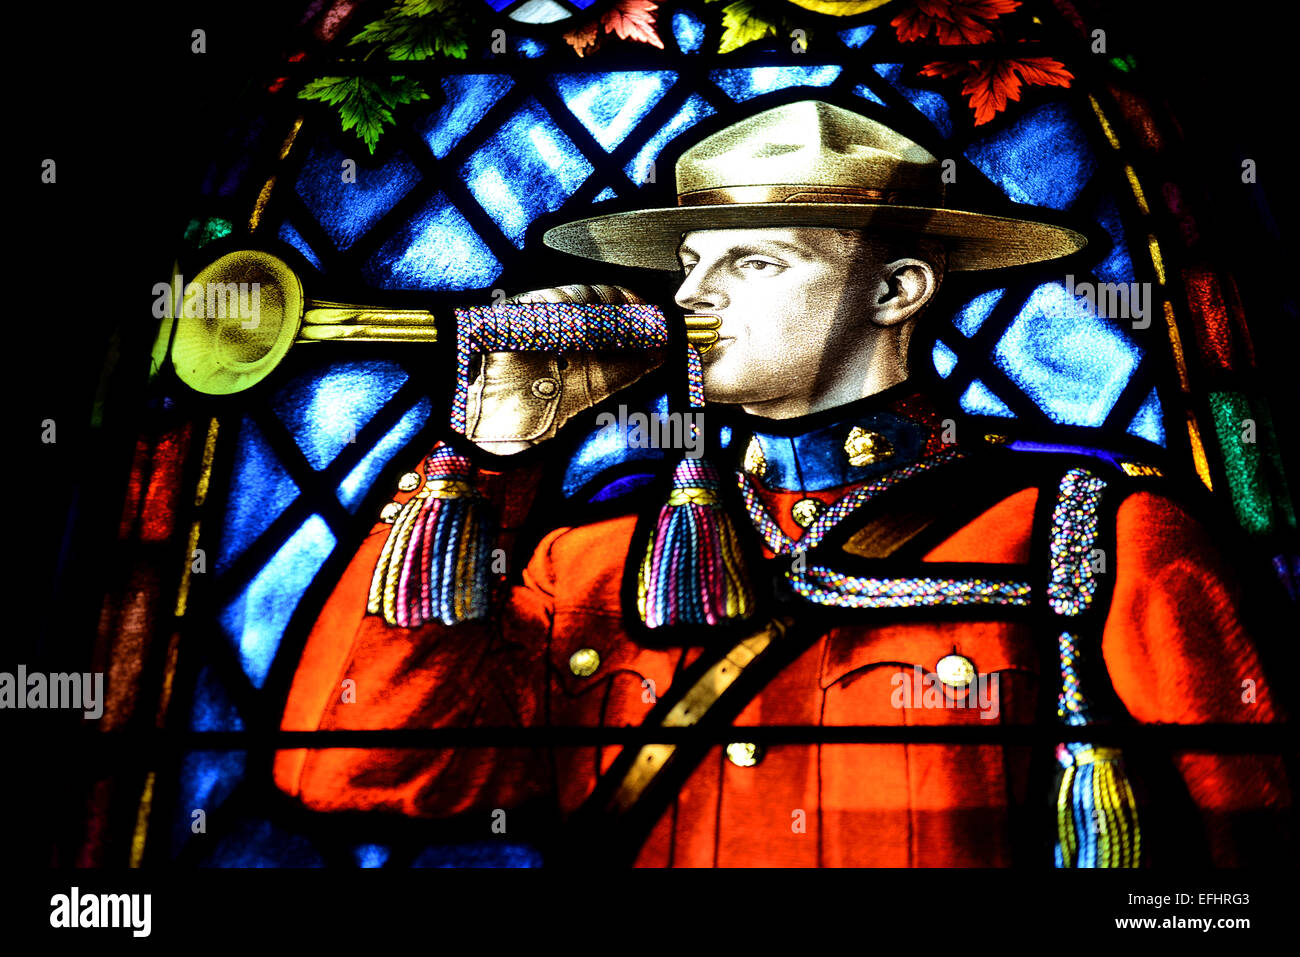 Inside the chapel at the Royal Canadian Mounted Police Depot, RCMP training academy in Regina, Saskatchewan, Canada Stock Photo